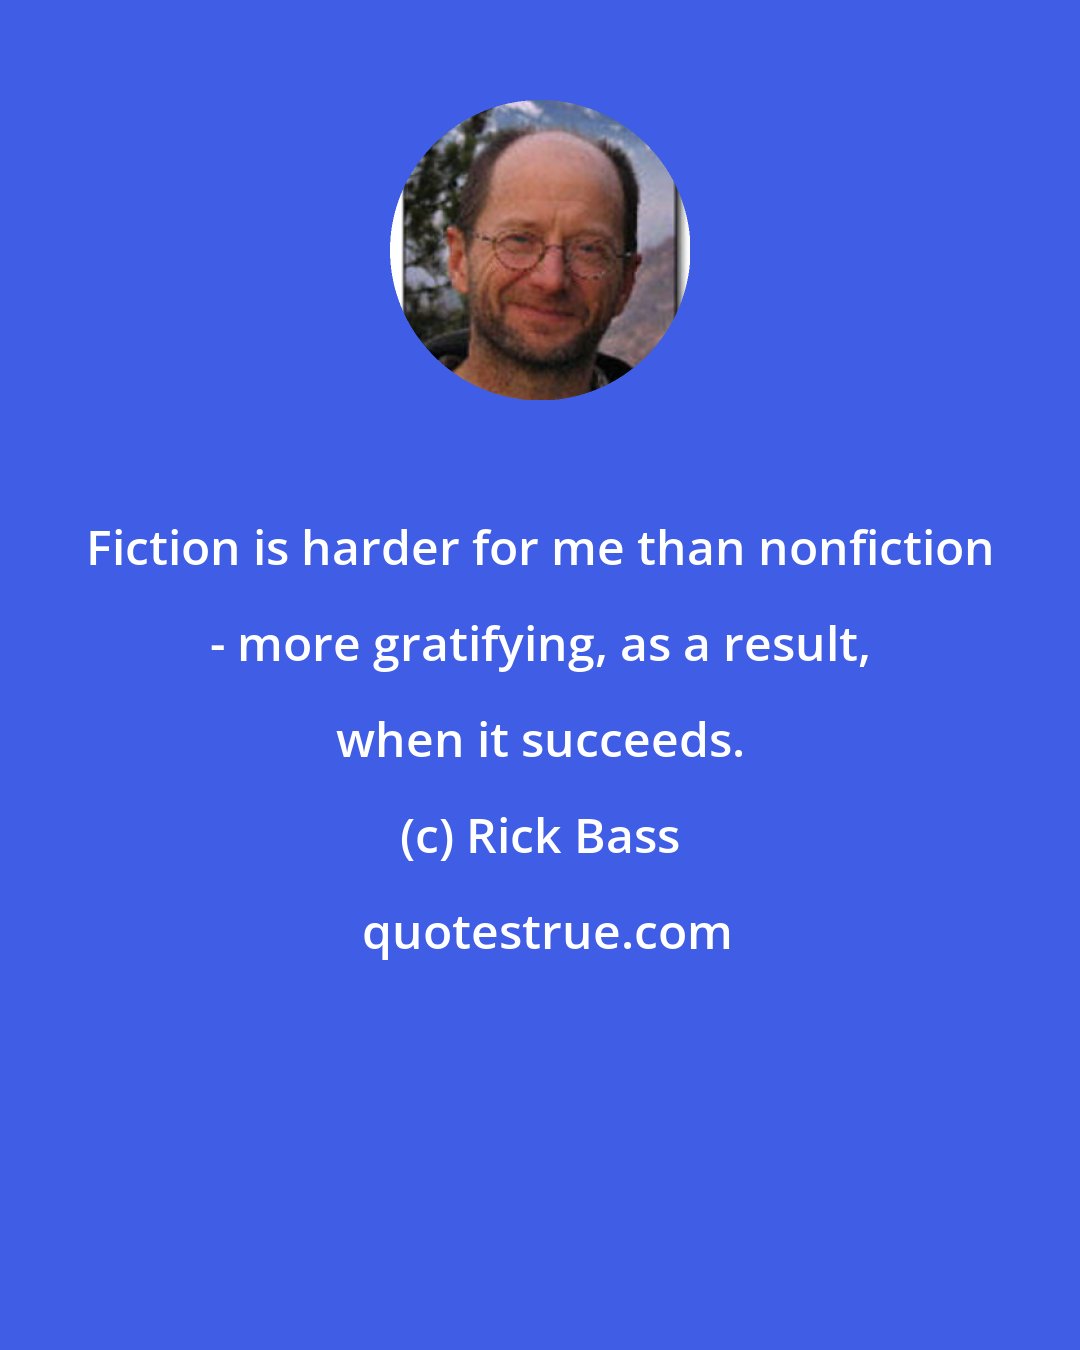 Rick Bass: Fiction is harder for me than nonfiction - more gratifying, as a result, when it succeeds.